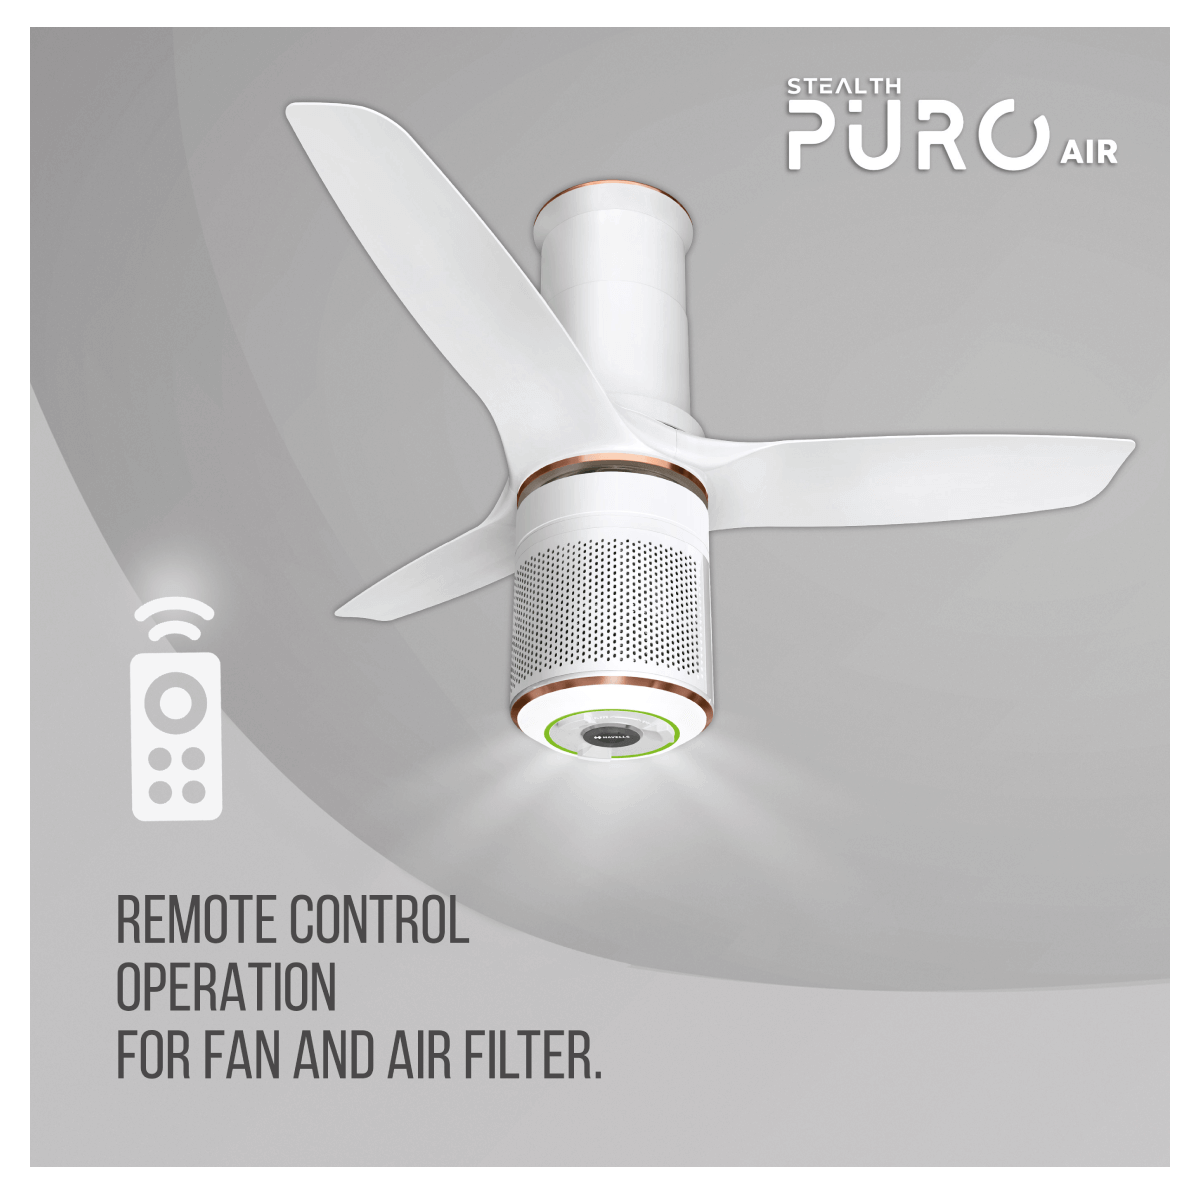 Havells Ceiling Fan 1250mm Under Light with Air Purifier STEALTH PURO AIR